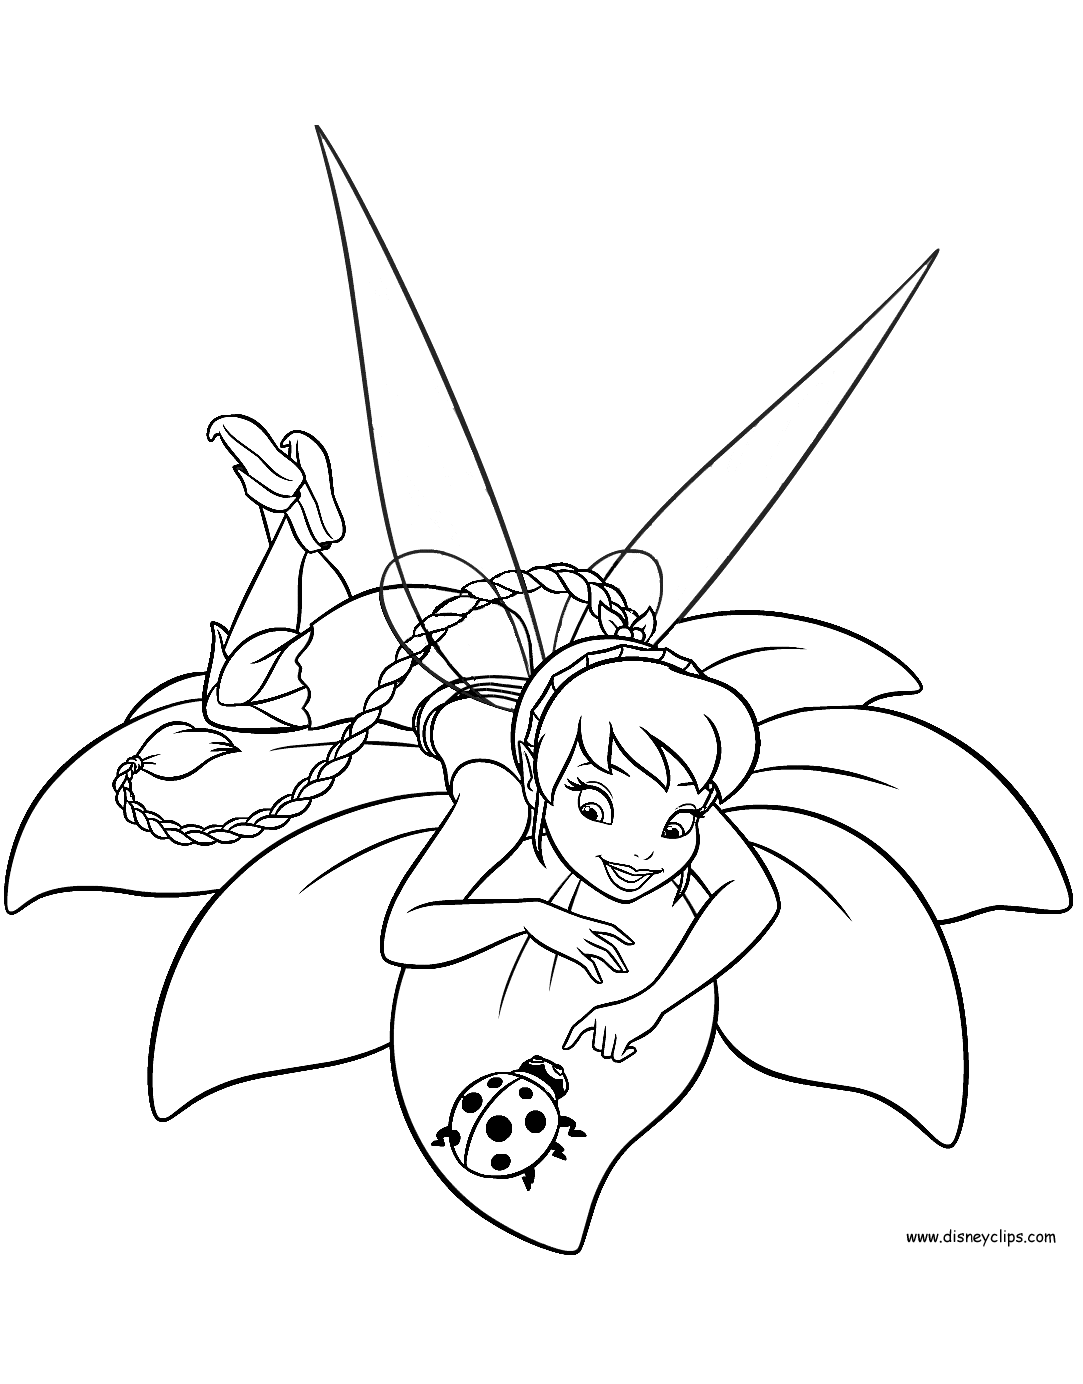 disney fairies coloring pages 2  disneyclips